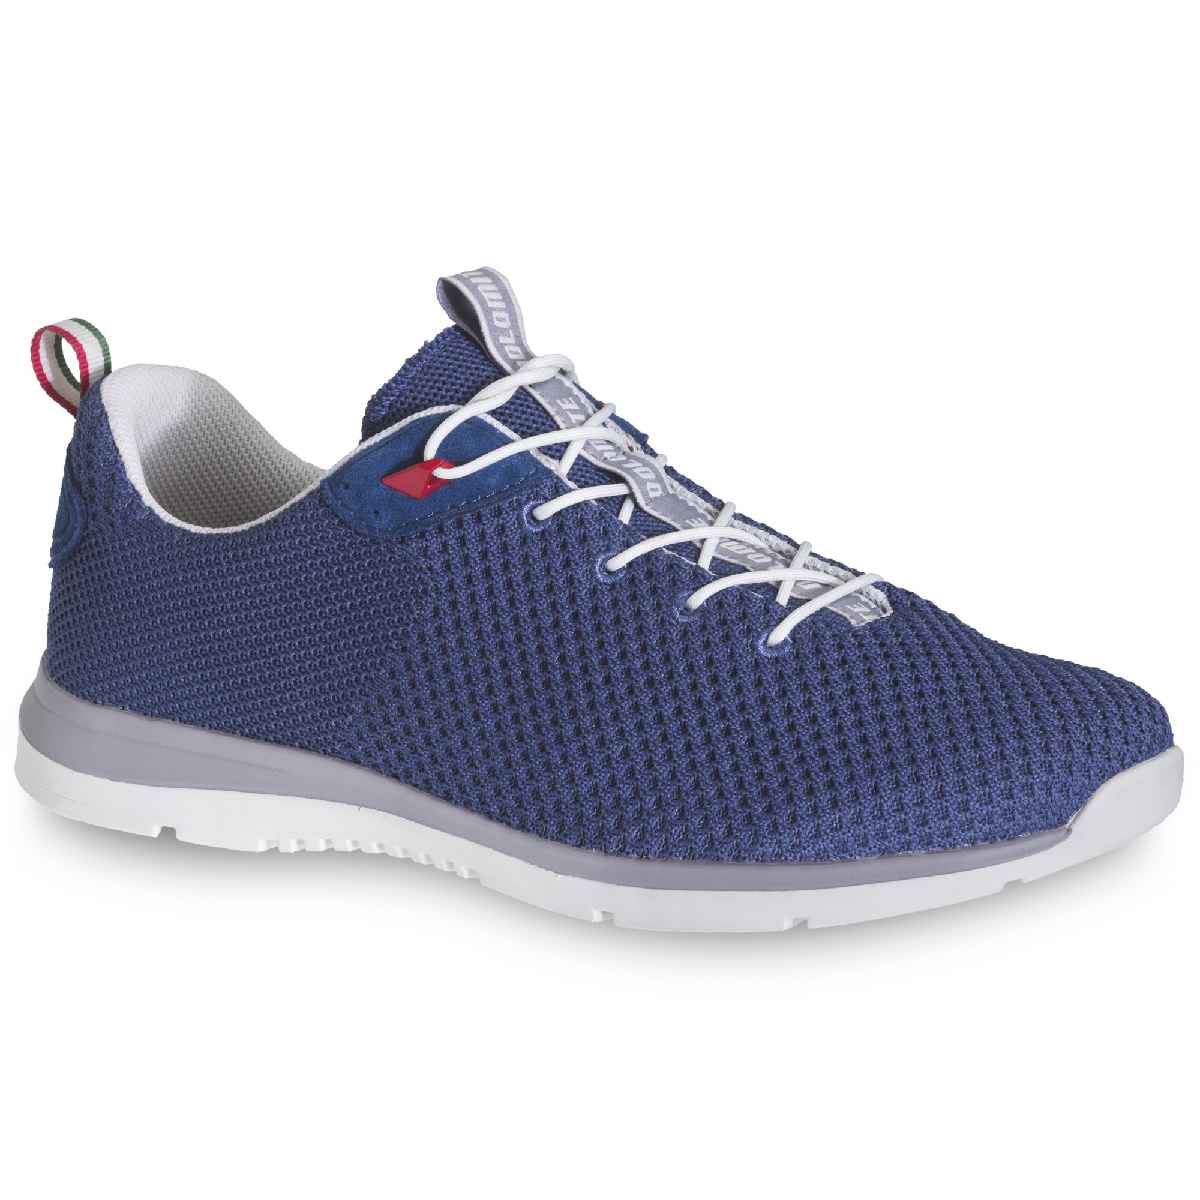 15940_chaussures_loisir_-_dol_shoe_move_knit